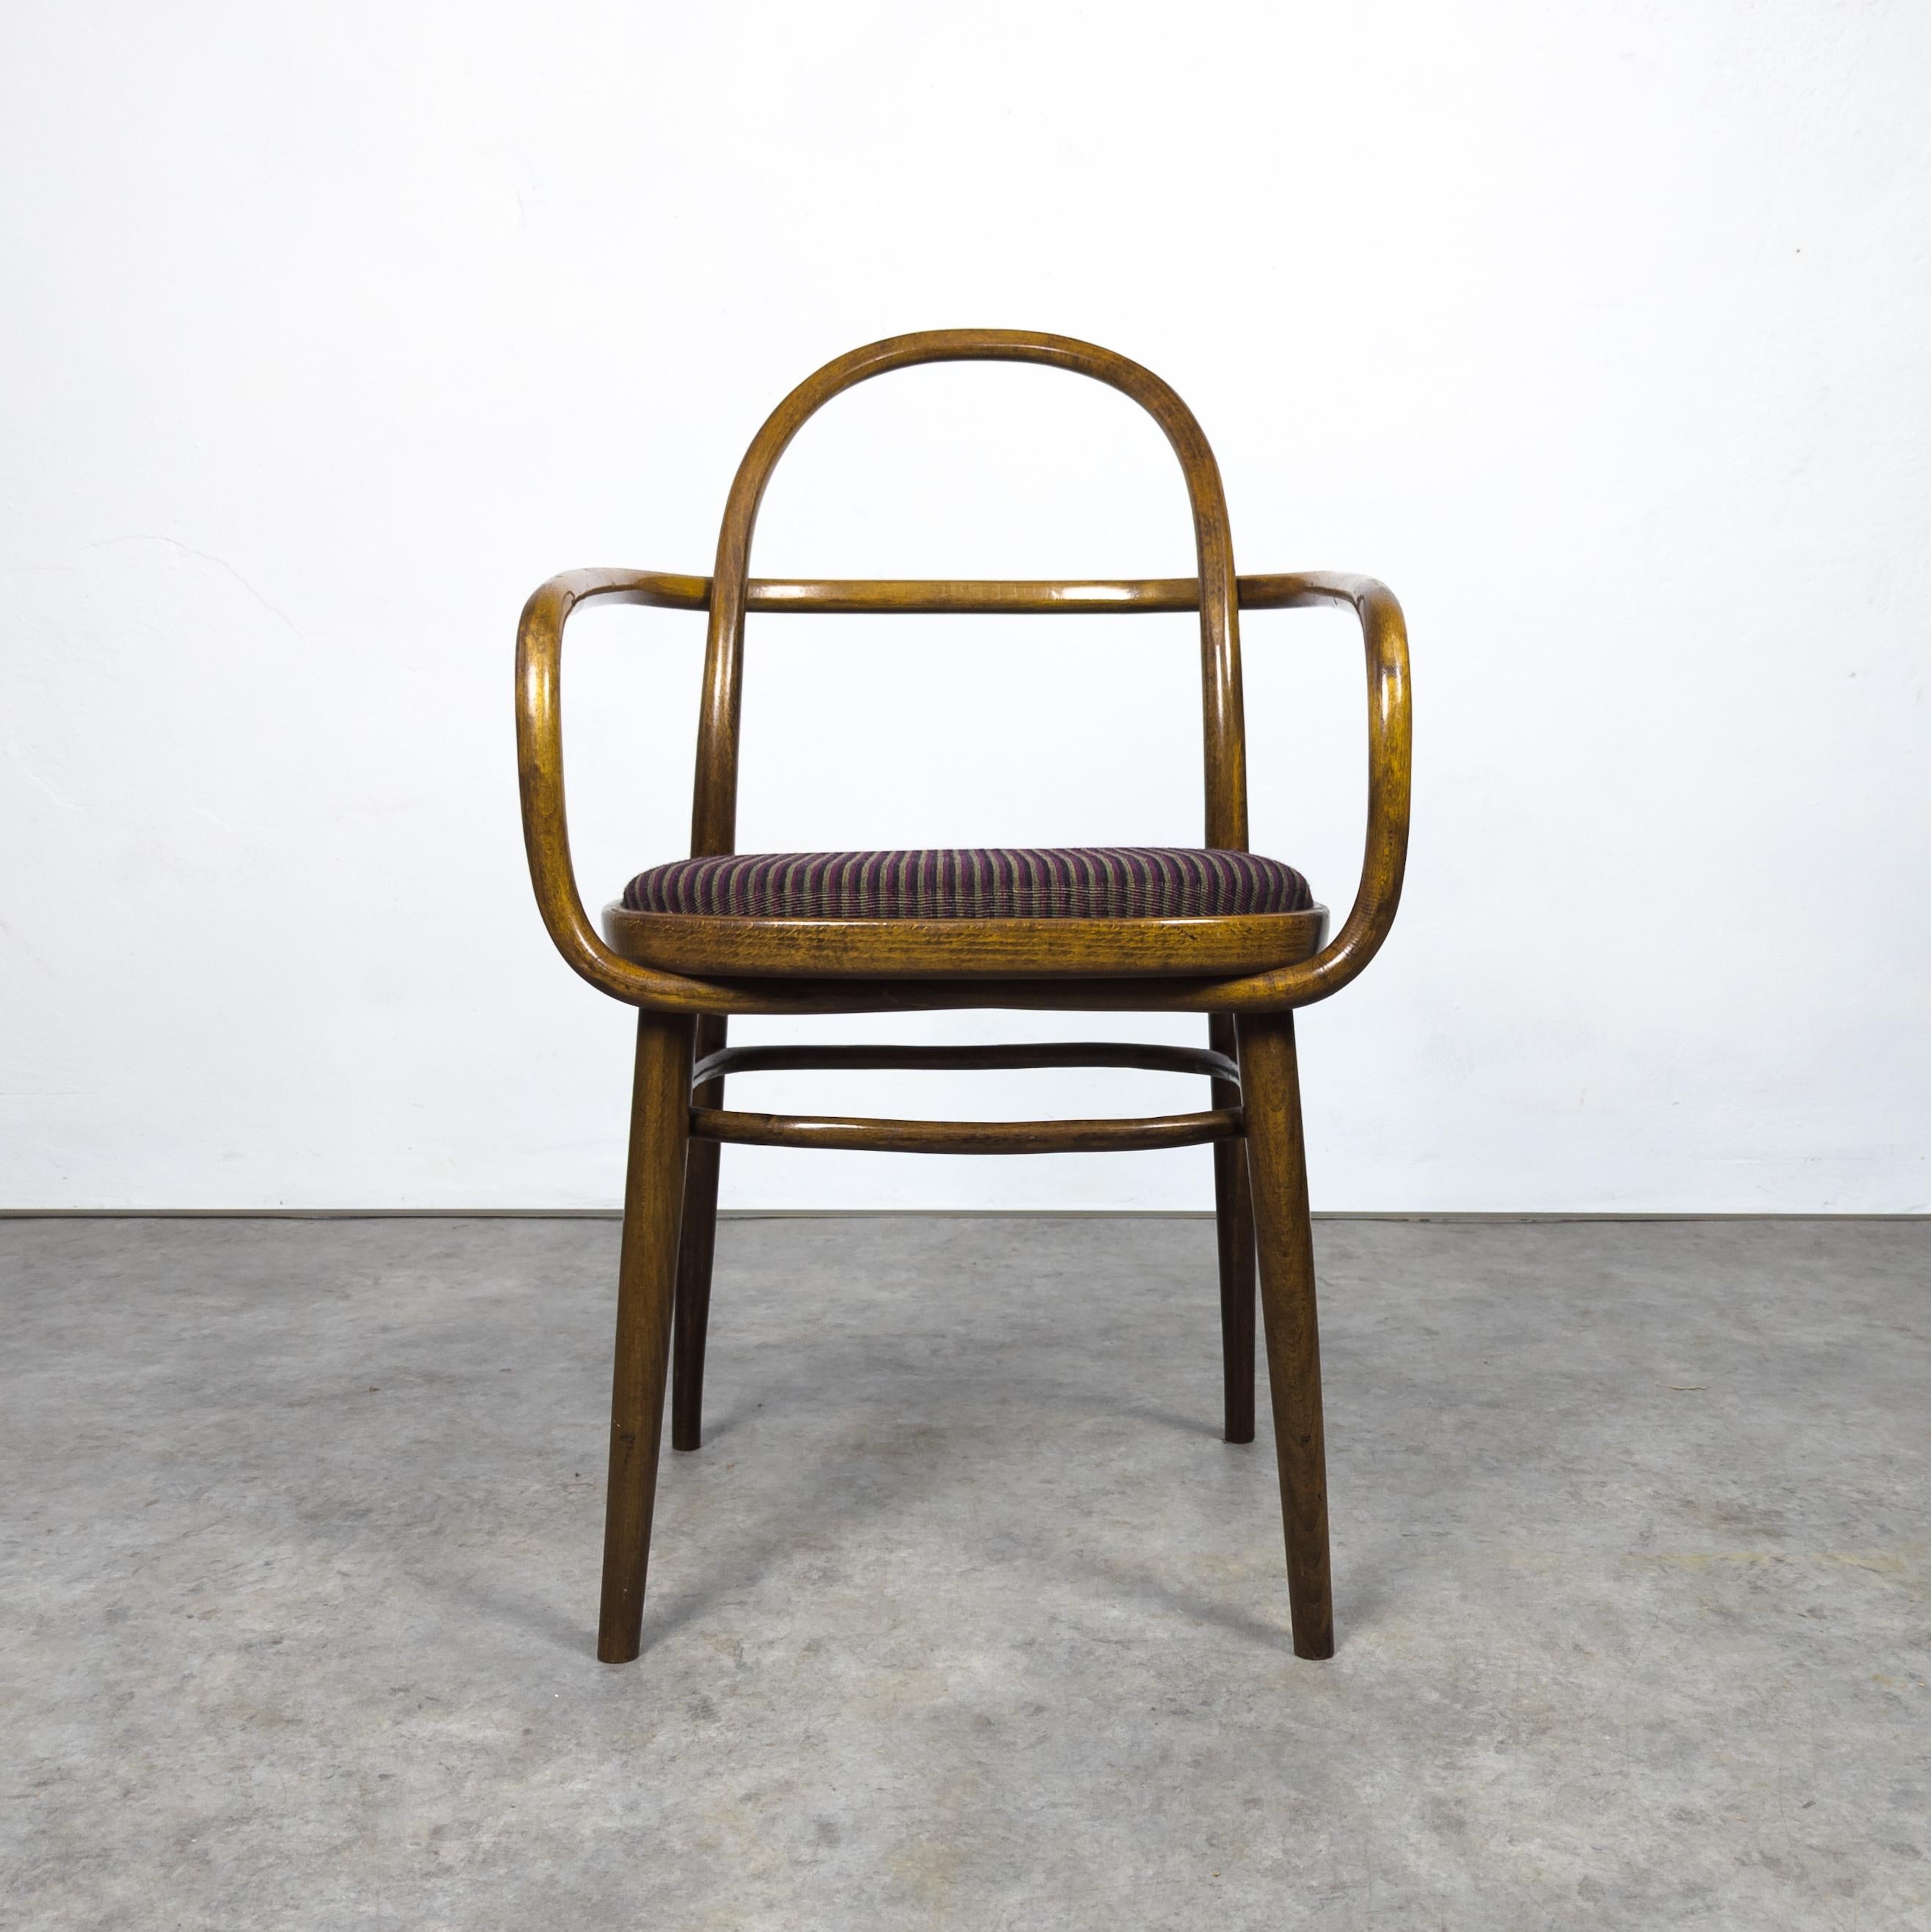 Extremely rare chair designed by Radomir Hofman for Ton in 1967 for EXPO exhibition in Toronto. These chairs were designed for this specific event and manufactured in limited series under catalogue number 615 by Thonet successor company TON, former